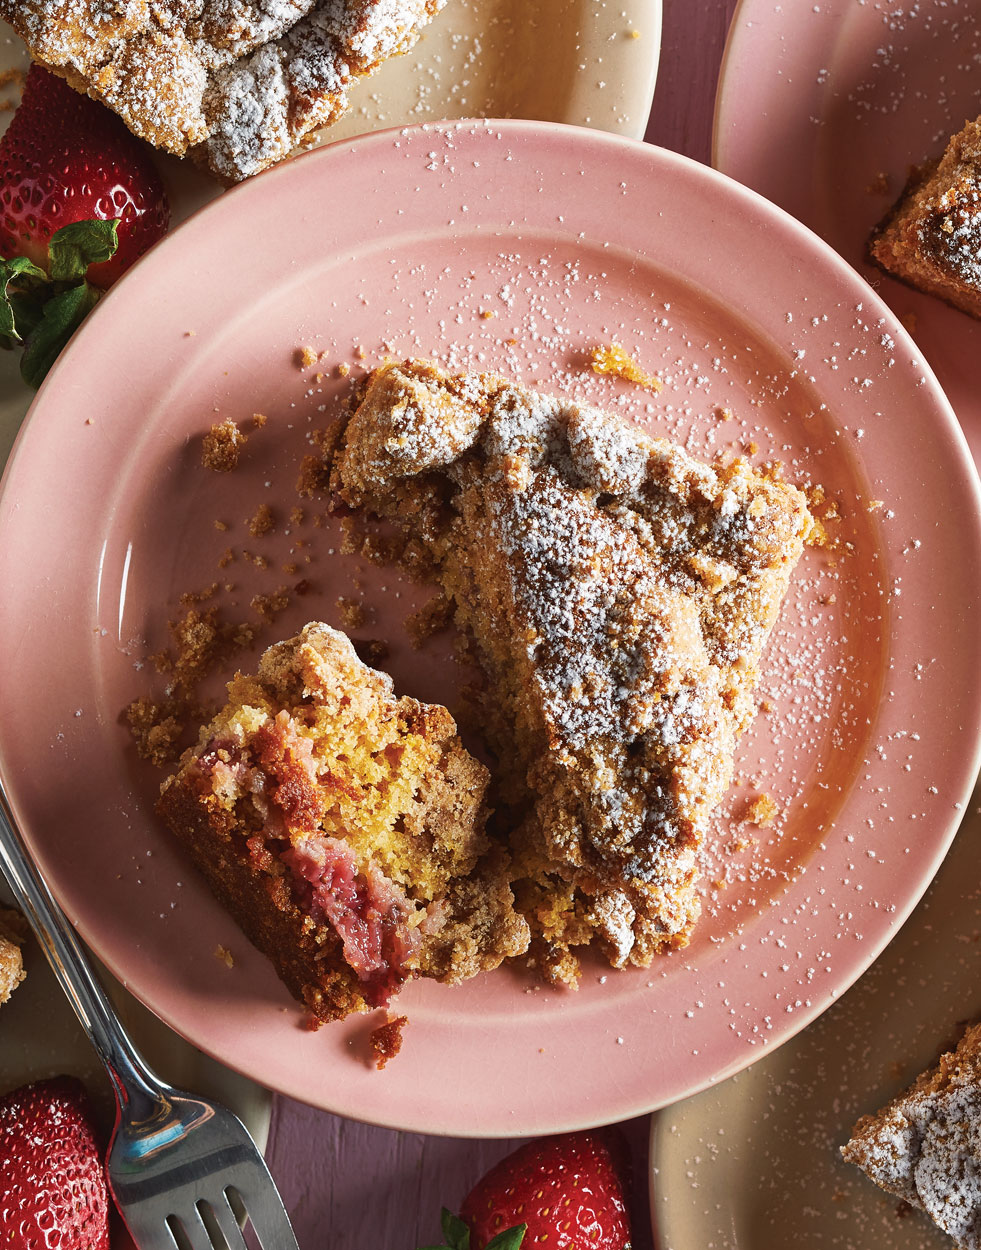 Strawberry-Rhubarb Coffee Cake with crumb topping